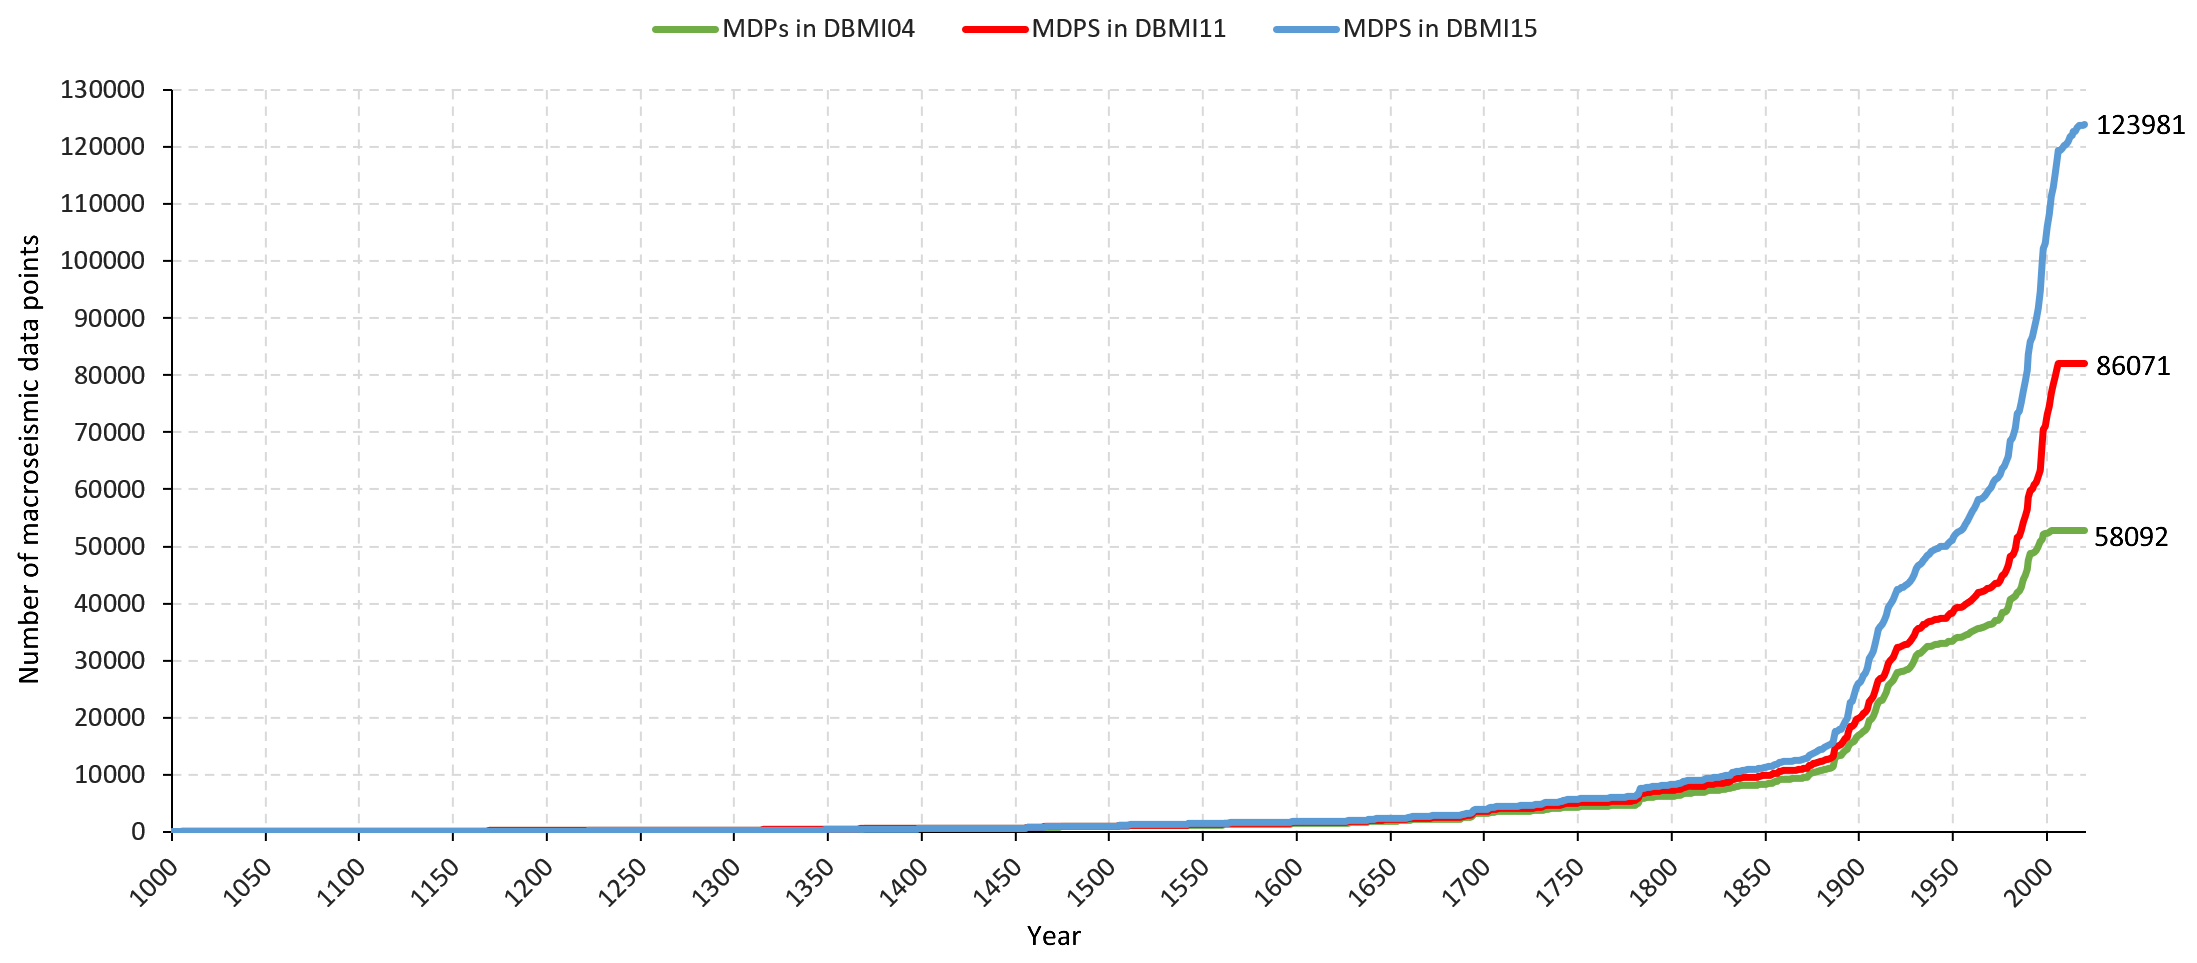 Comparison of the number of MDPs (Macroseismic Data Points) per year in various DBMI releases